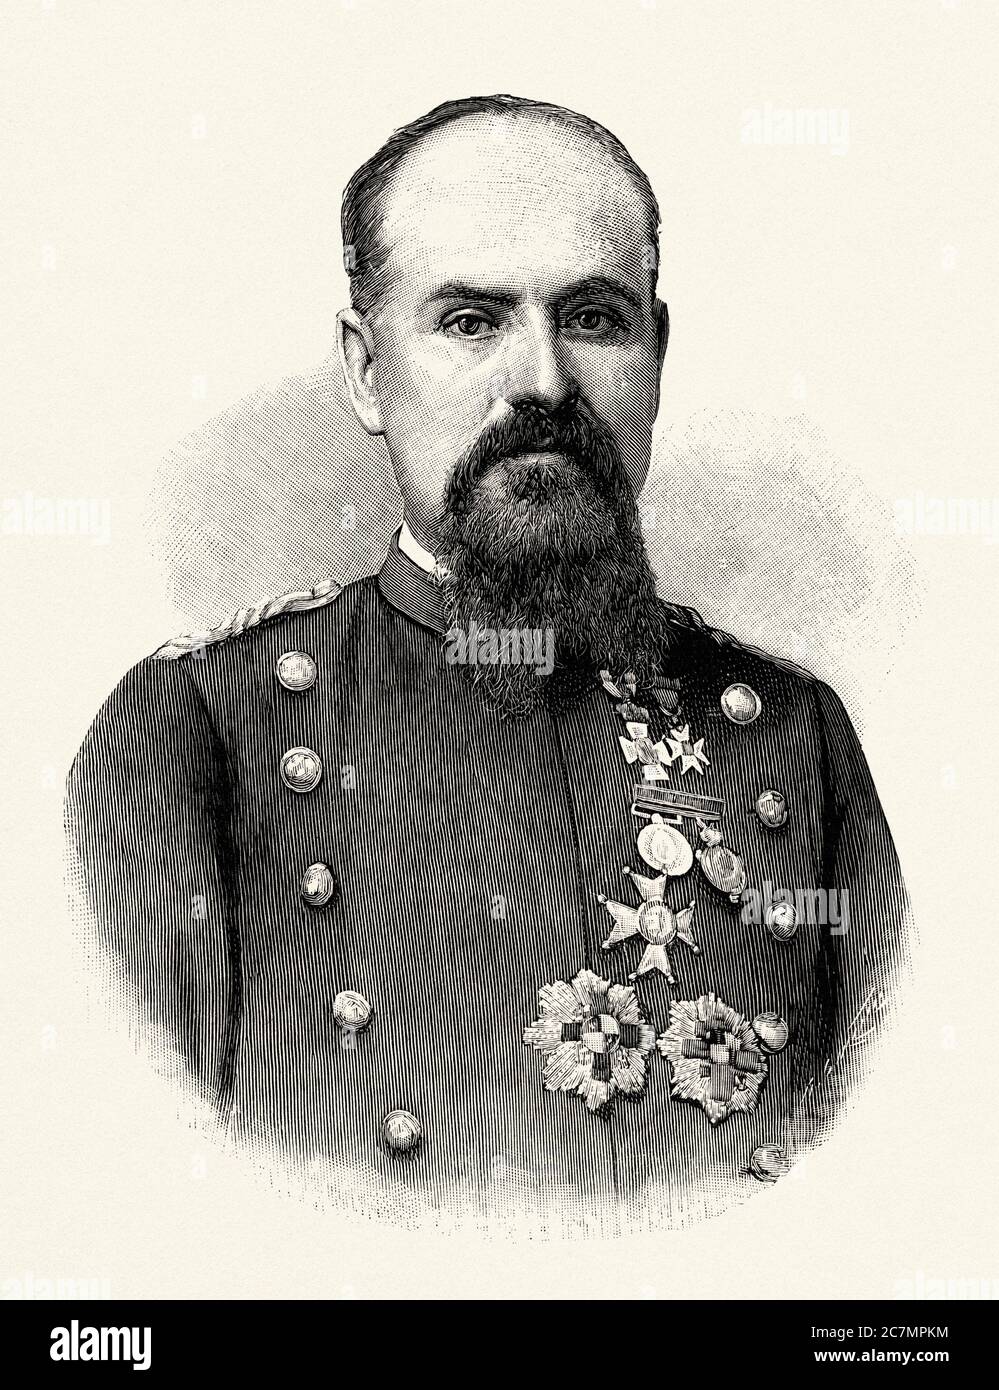 José Oliver y Vidal, Military Chief of the Madrid Security Corps. Lieutenant Colonel of the Army, Captain of the Civil Guard. The Spanish Civil Guard in front of the anarchist organization La Mano Negra. Spain, Europe. From La Ilustracion Española y Americana 1895 Stock Photo